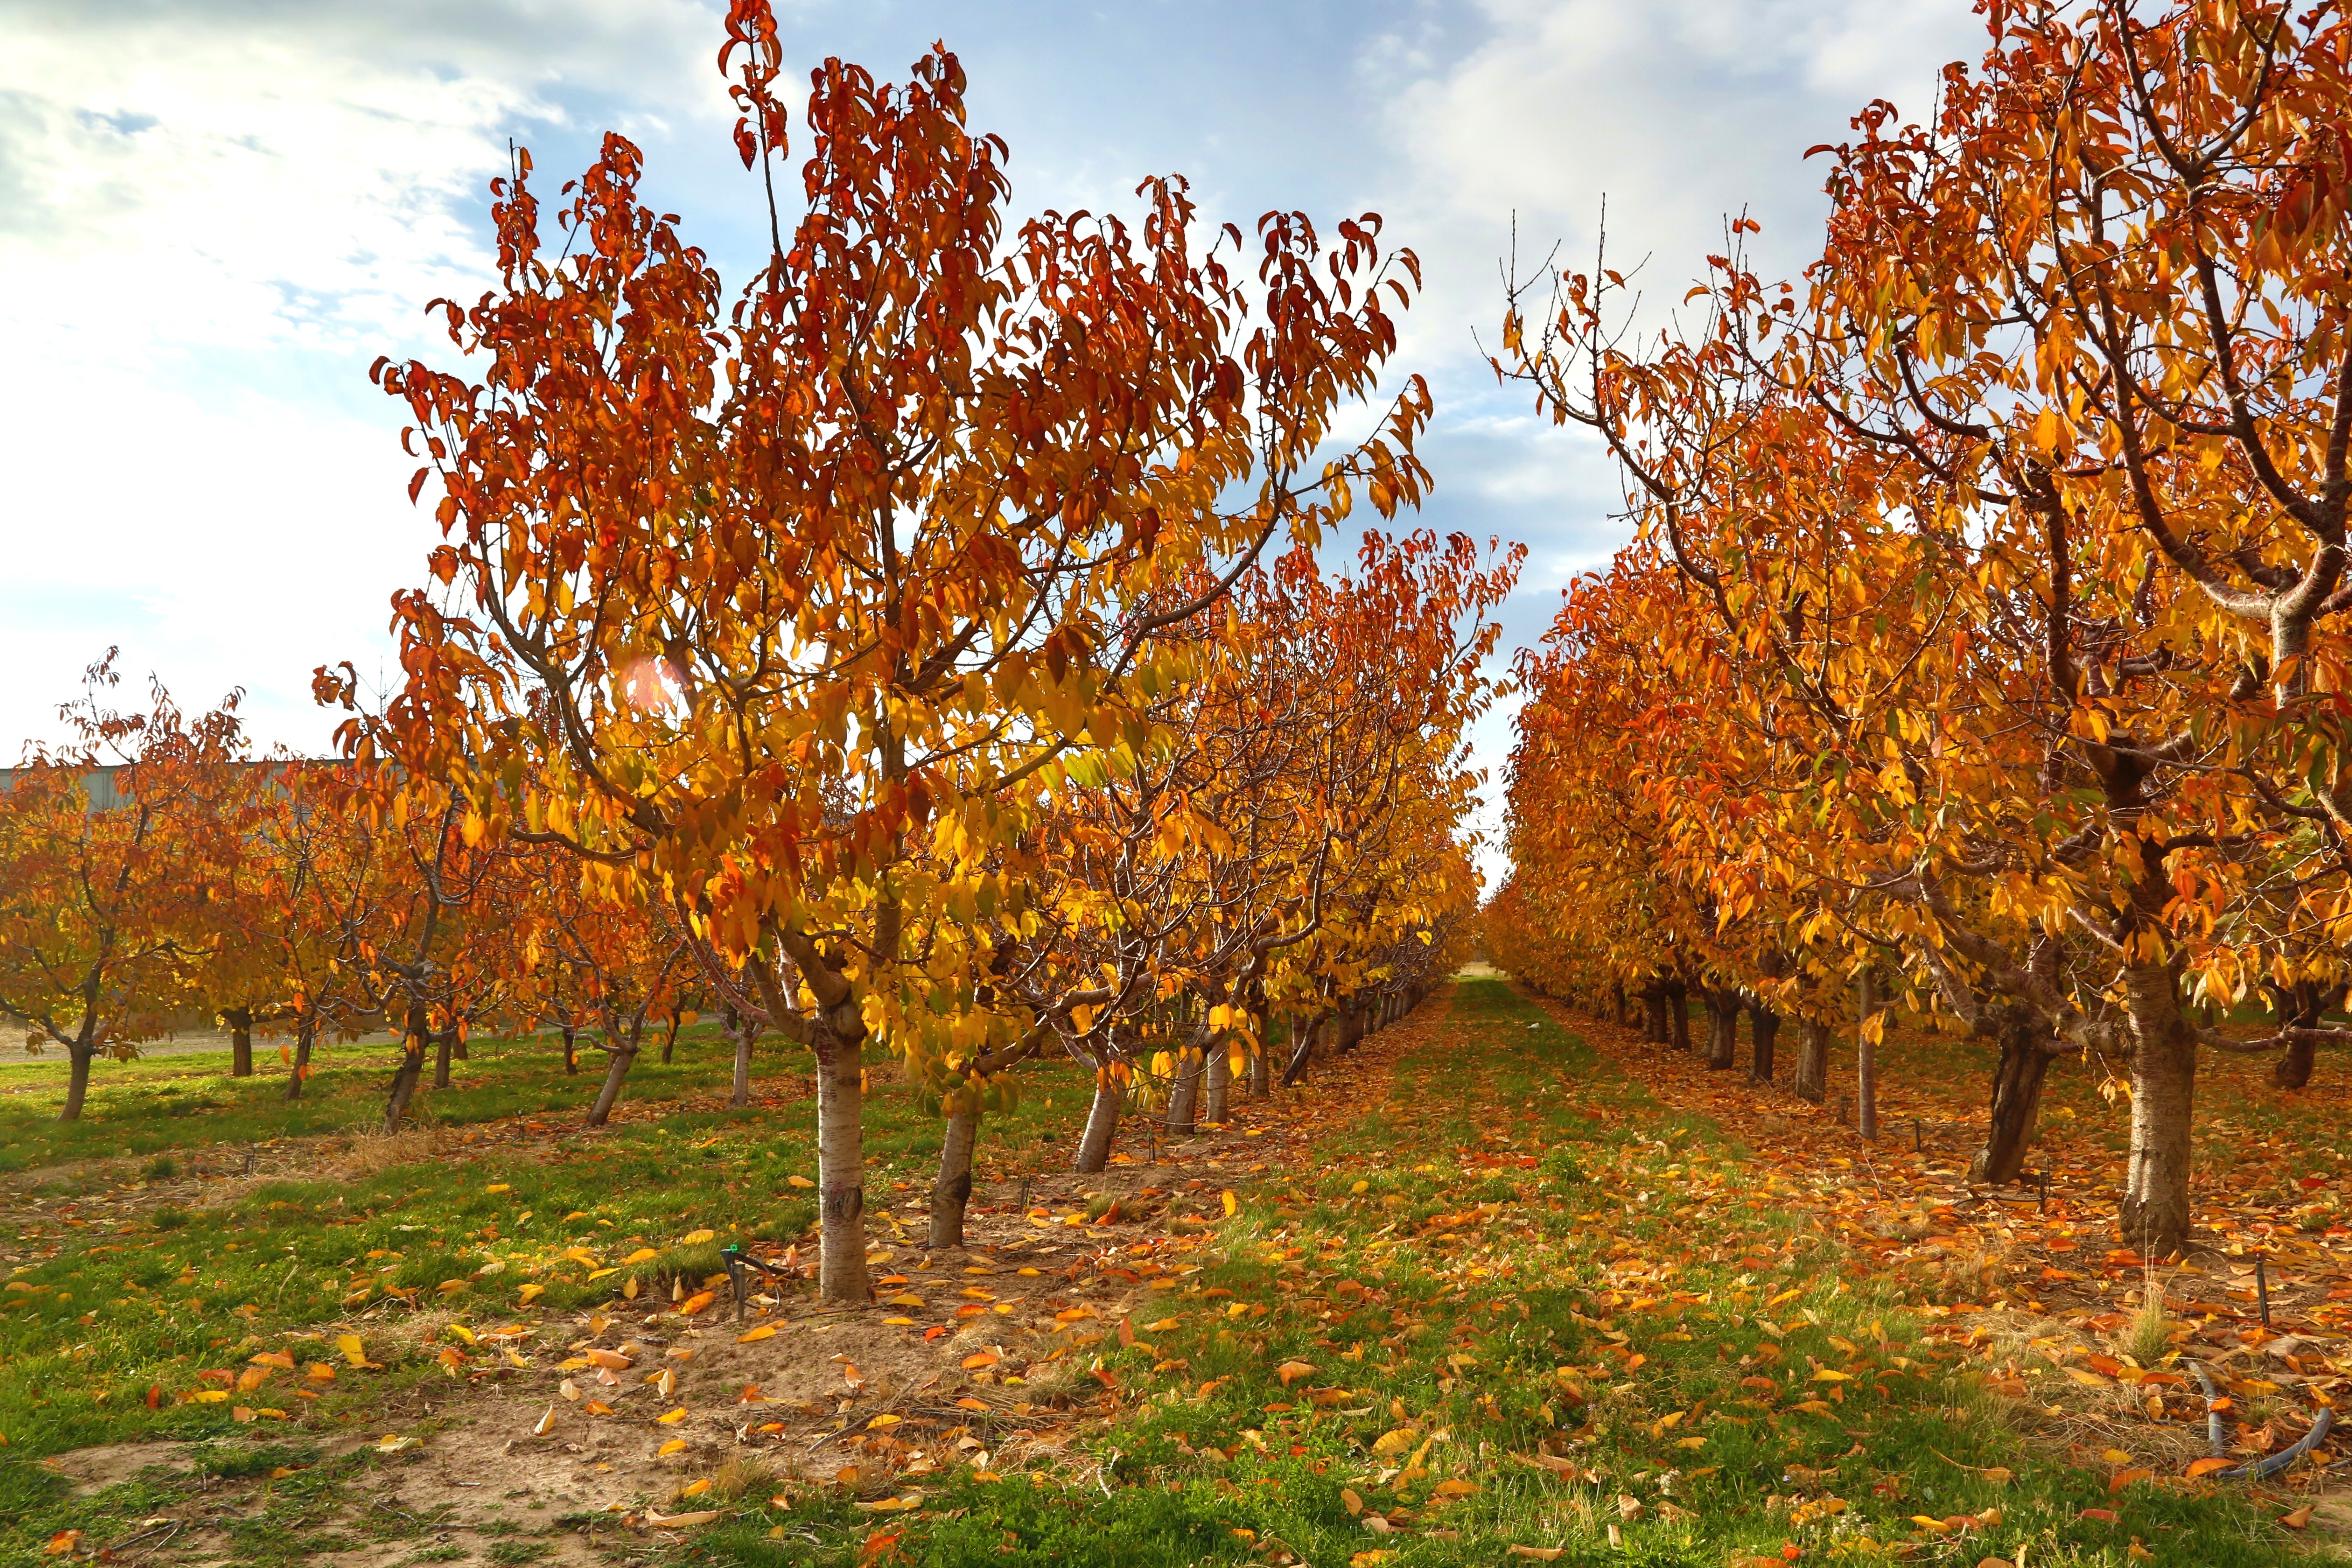 Rows of trees in an orchard with yellow and orange leaves, with a blue sky and clouds.